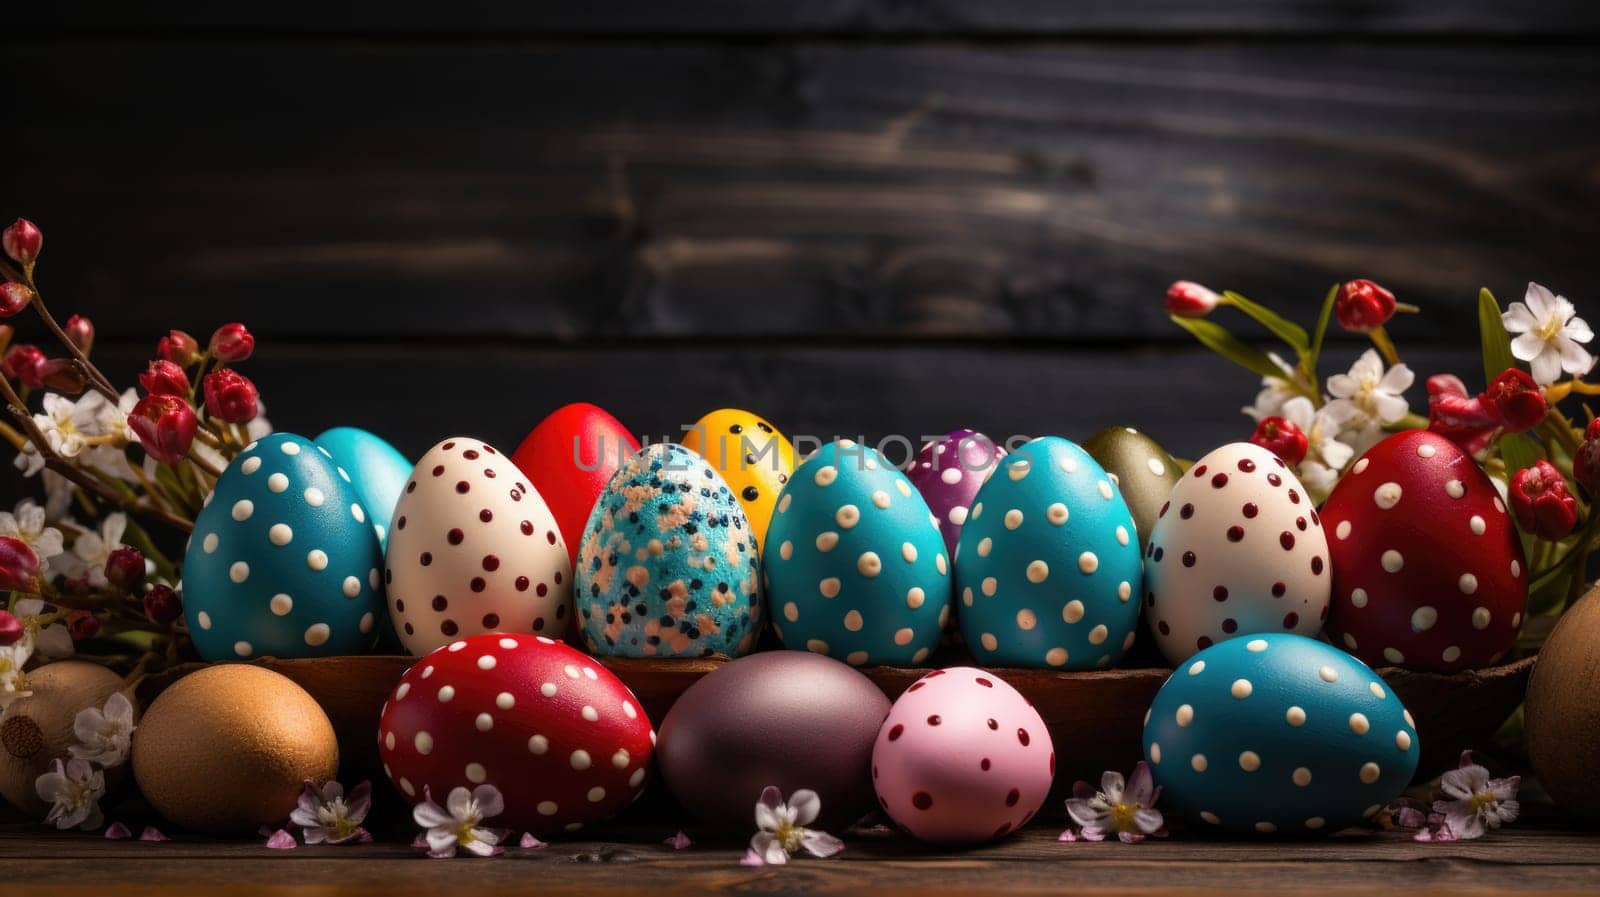 Multiple eggs of various colors and sizes placed neatly on a wooden table surface.